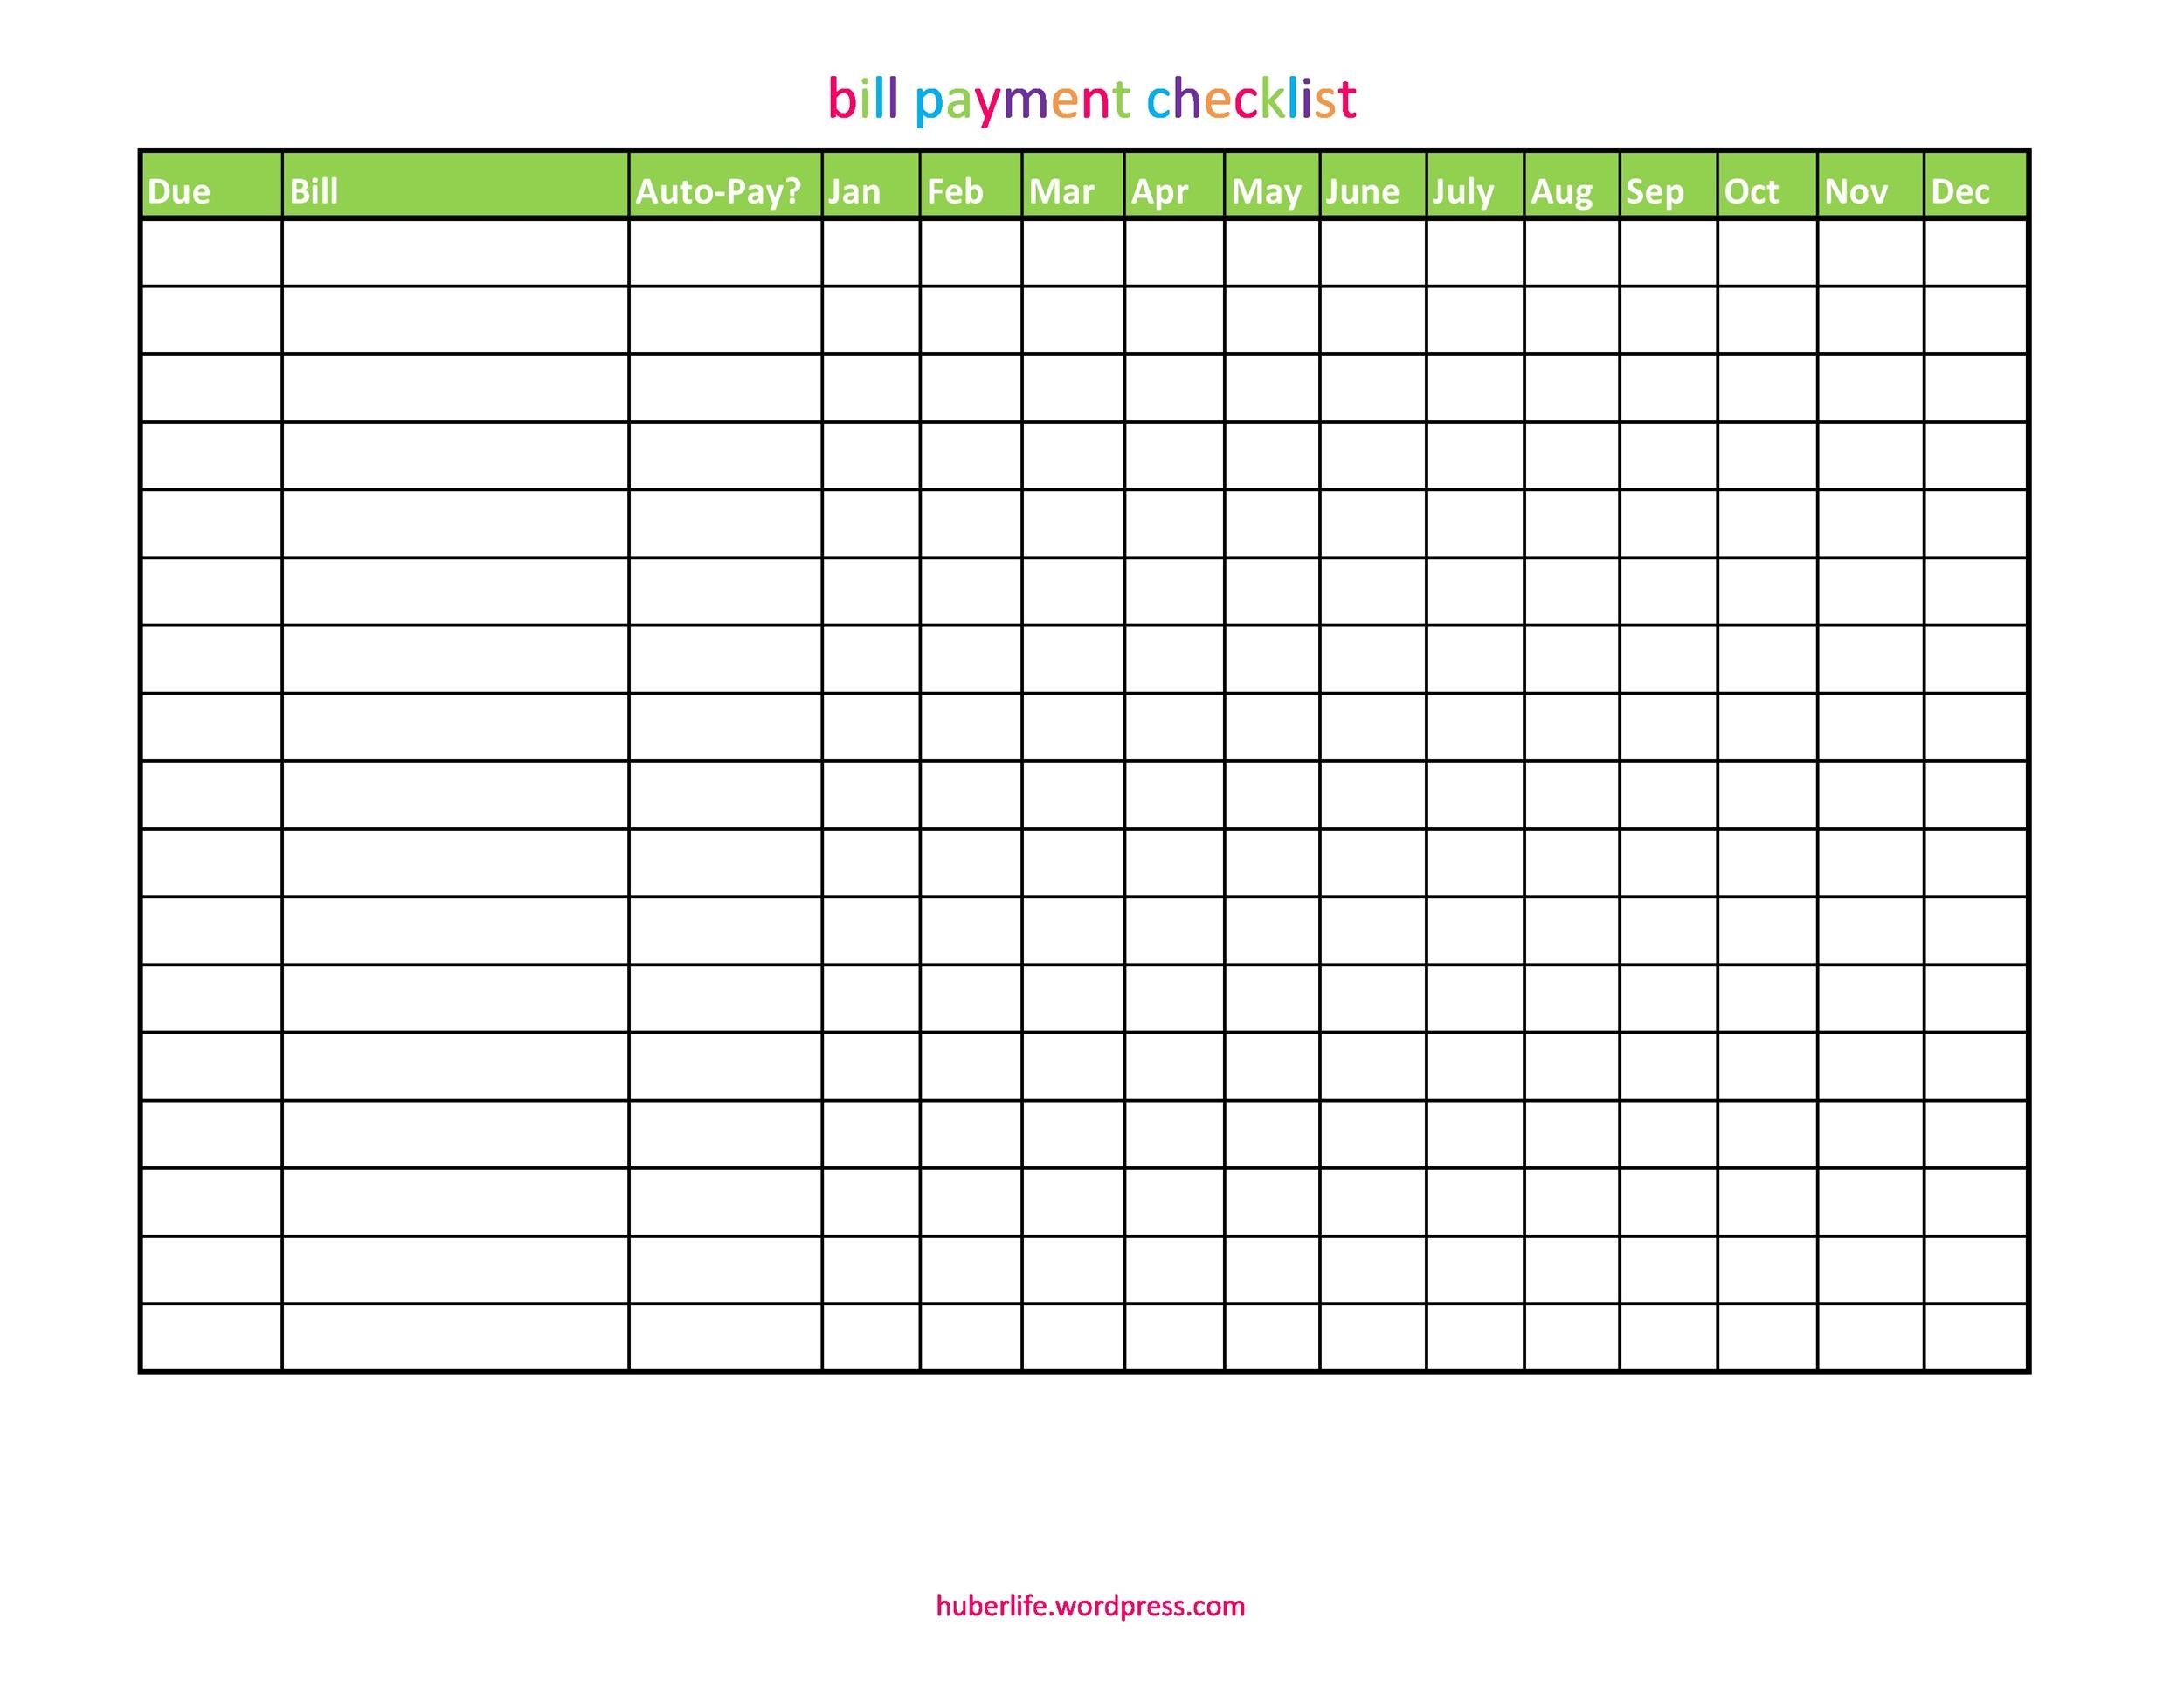 33 Free Bill Pay Checklists &amp; Bill Calendars (Pdf, Word &amp; Excel)  Bill Payment Spreadsheet Printable